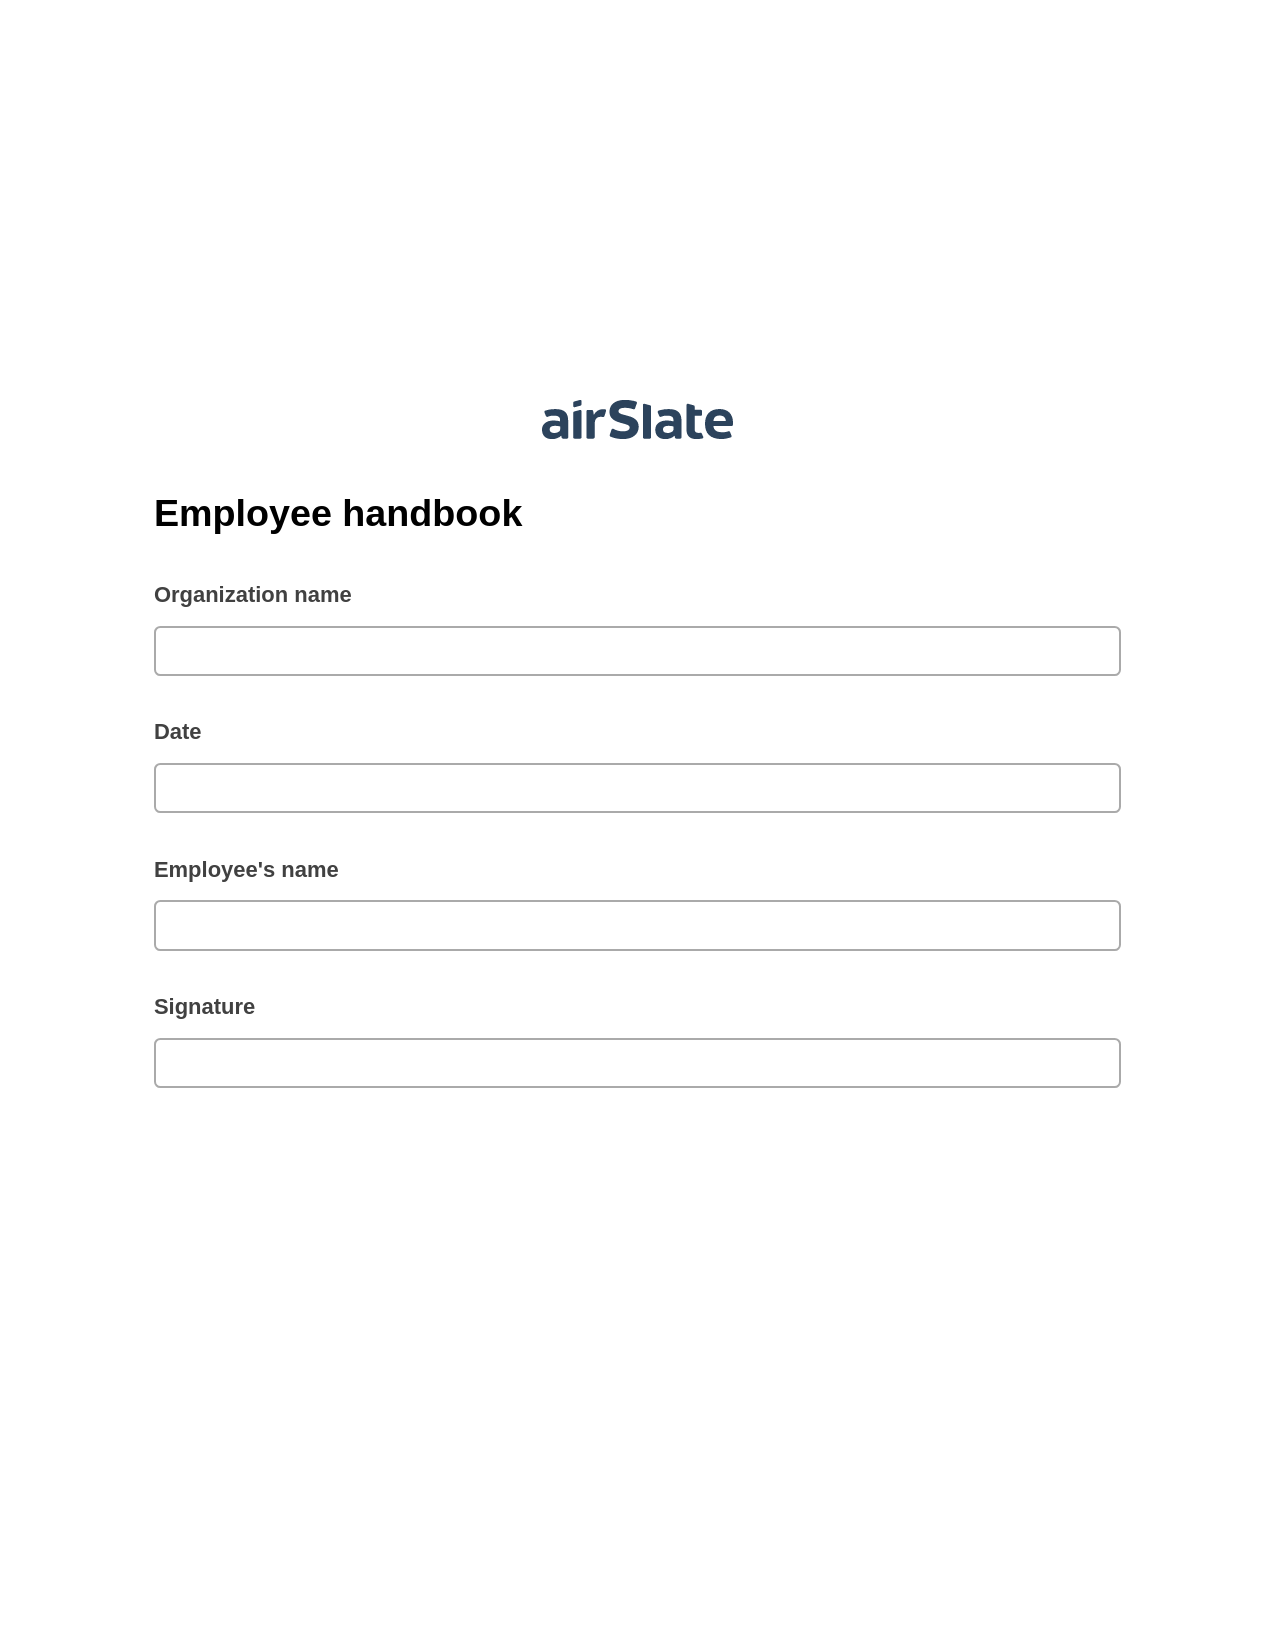 Employee handbook Pre-fill Dropdown from Airtable, Add Tags to Slate Bot, Export to Google Sheet Bot